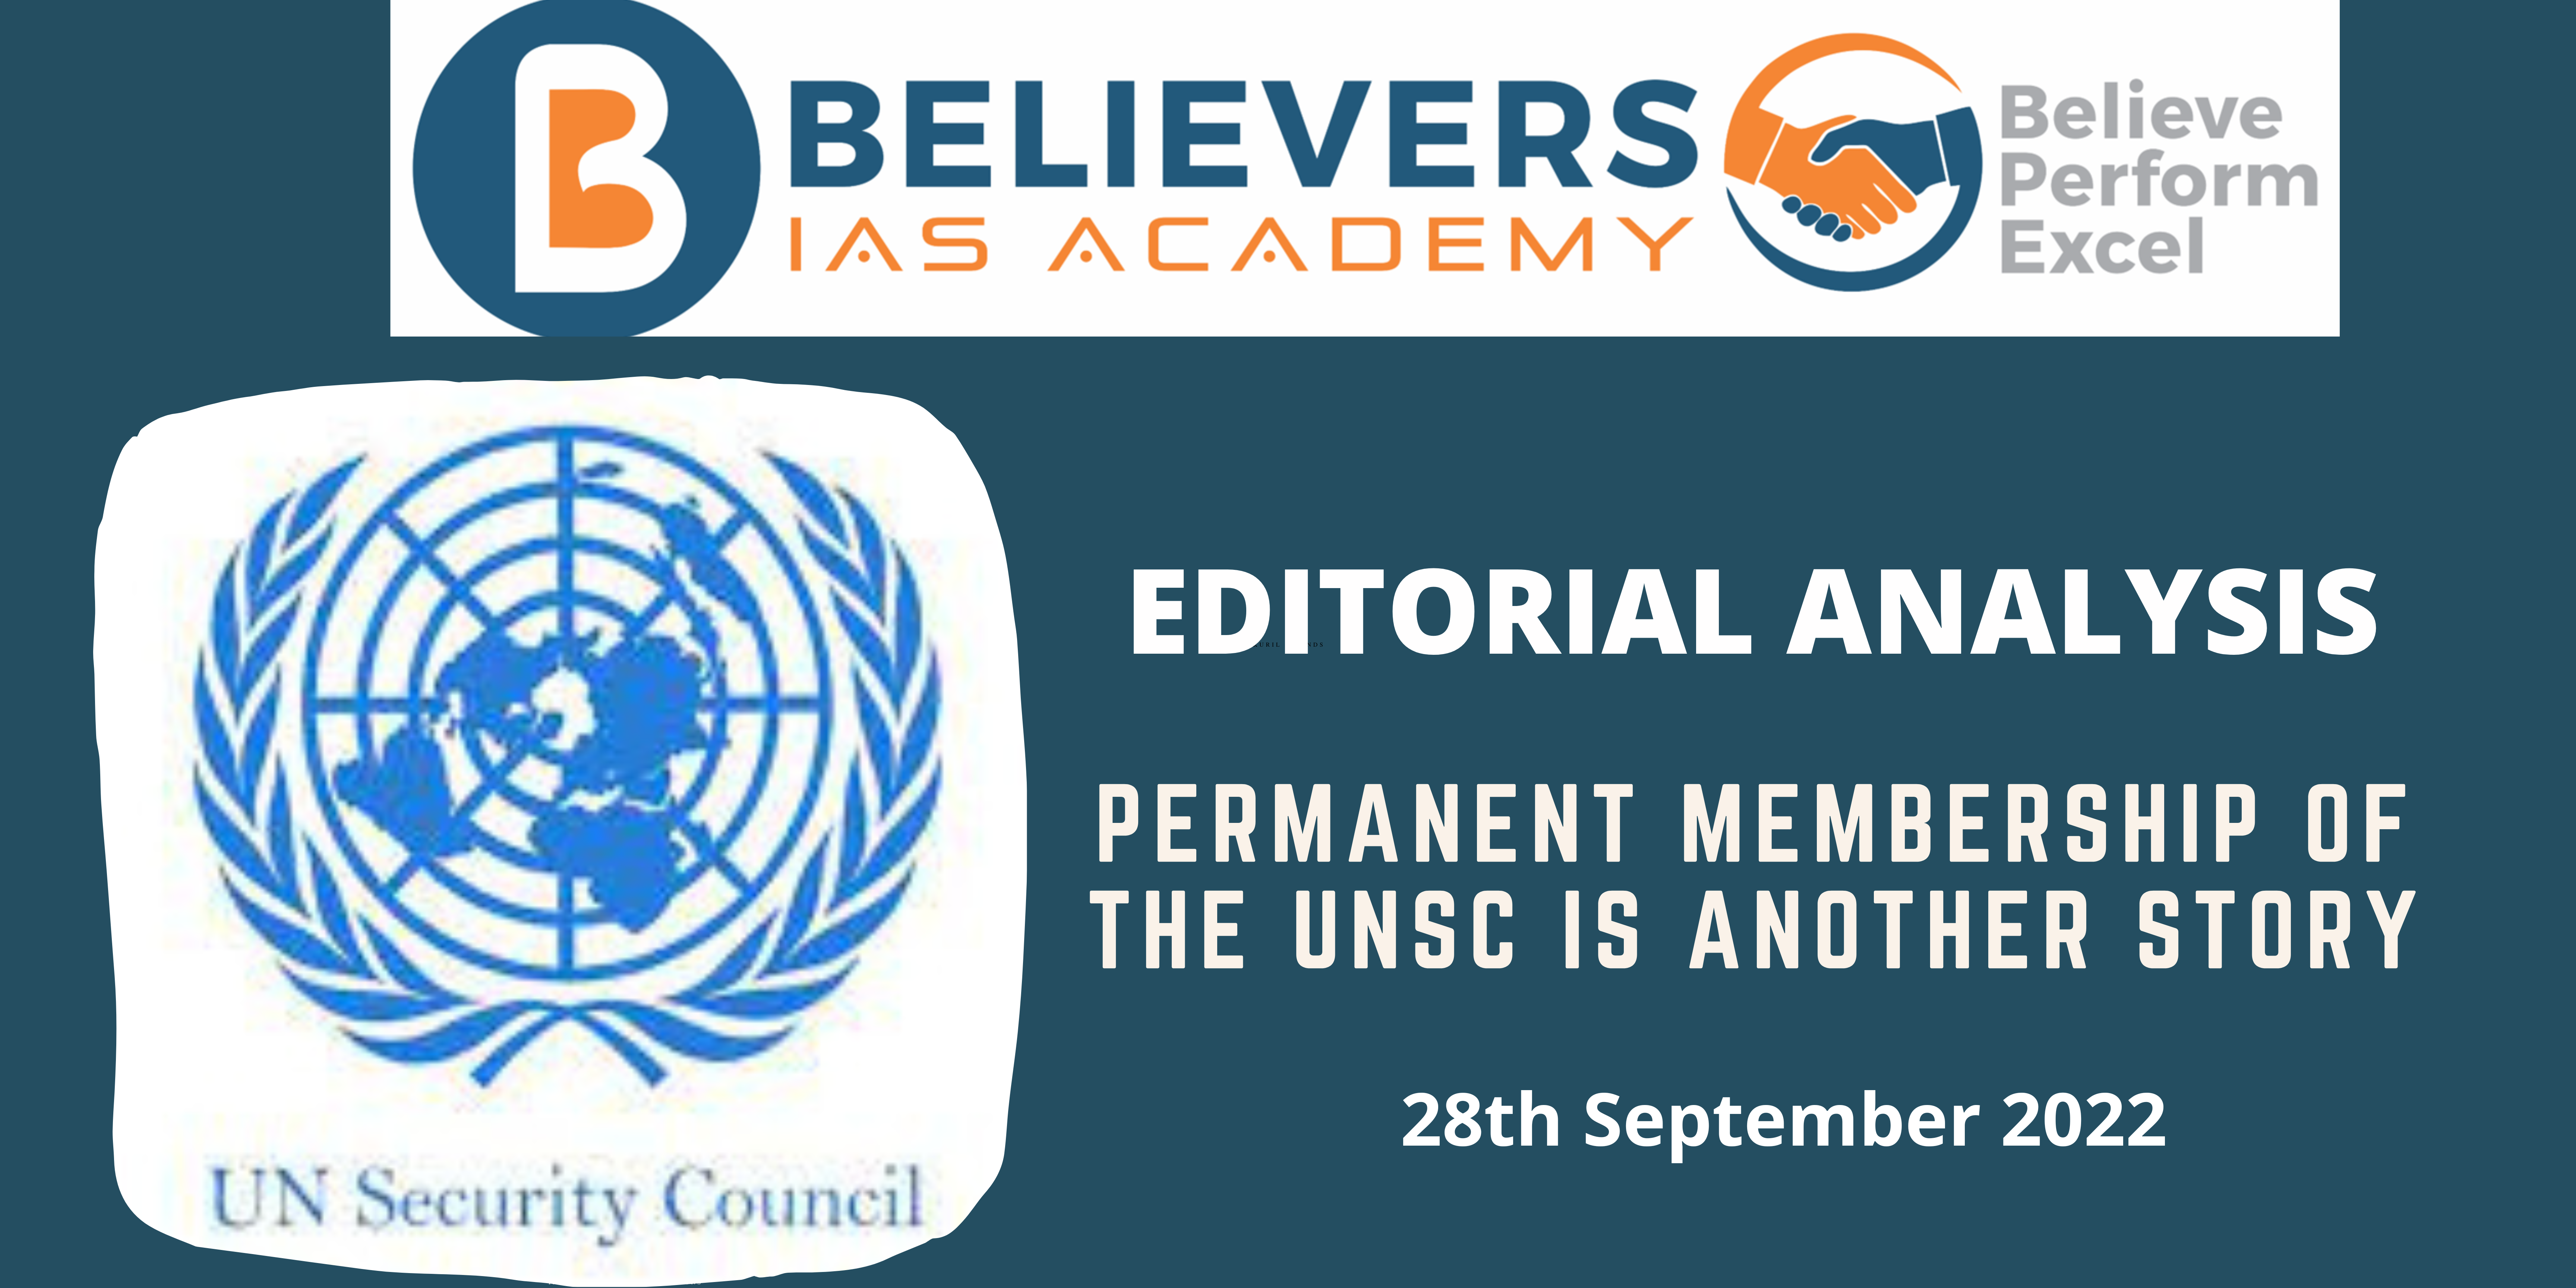 Permanent membership of the UNSC is another story